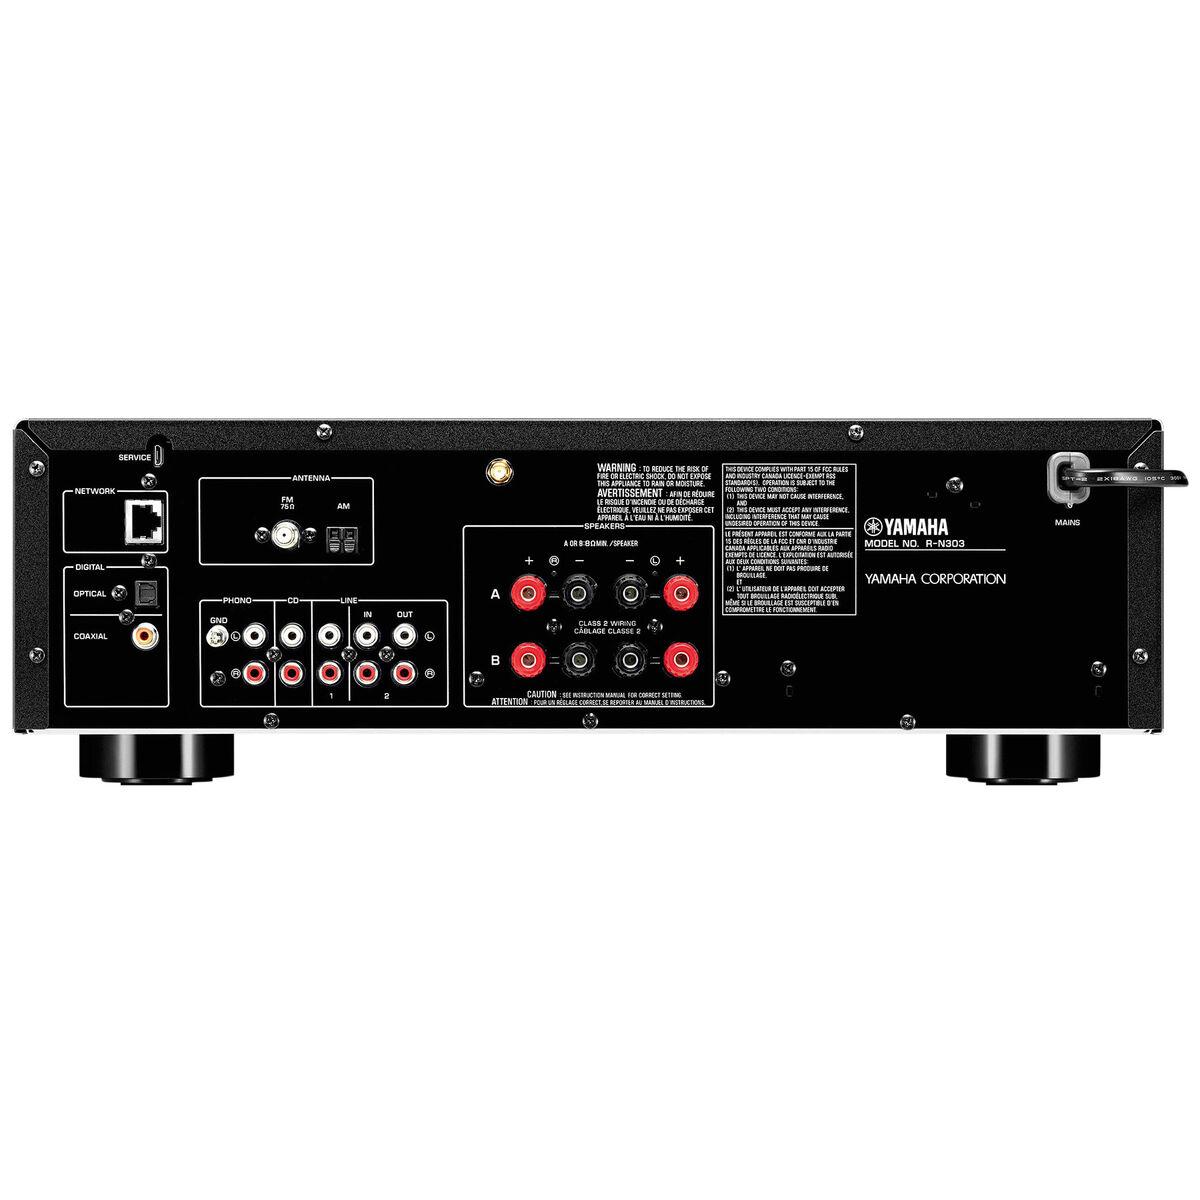 Yamaha R-N303 Network Stereo Receiver with MusicCast 100 Watts per 